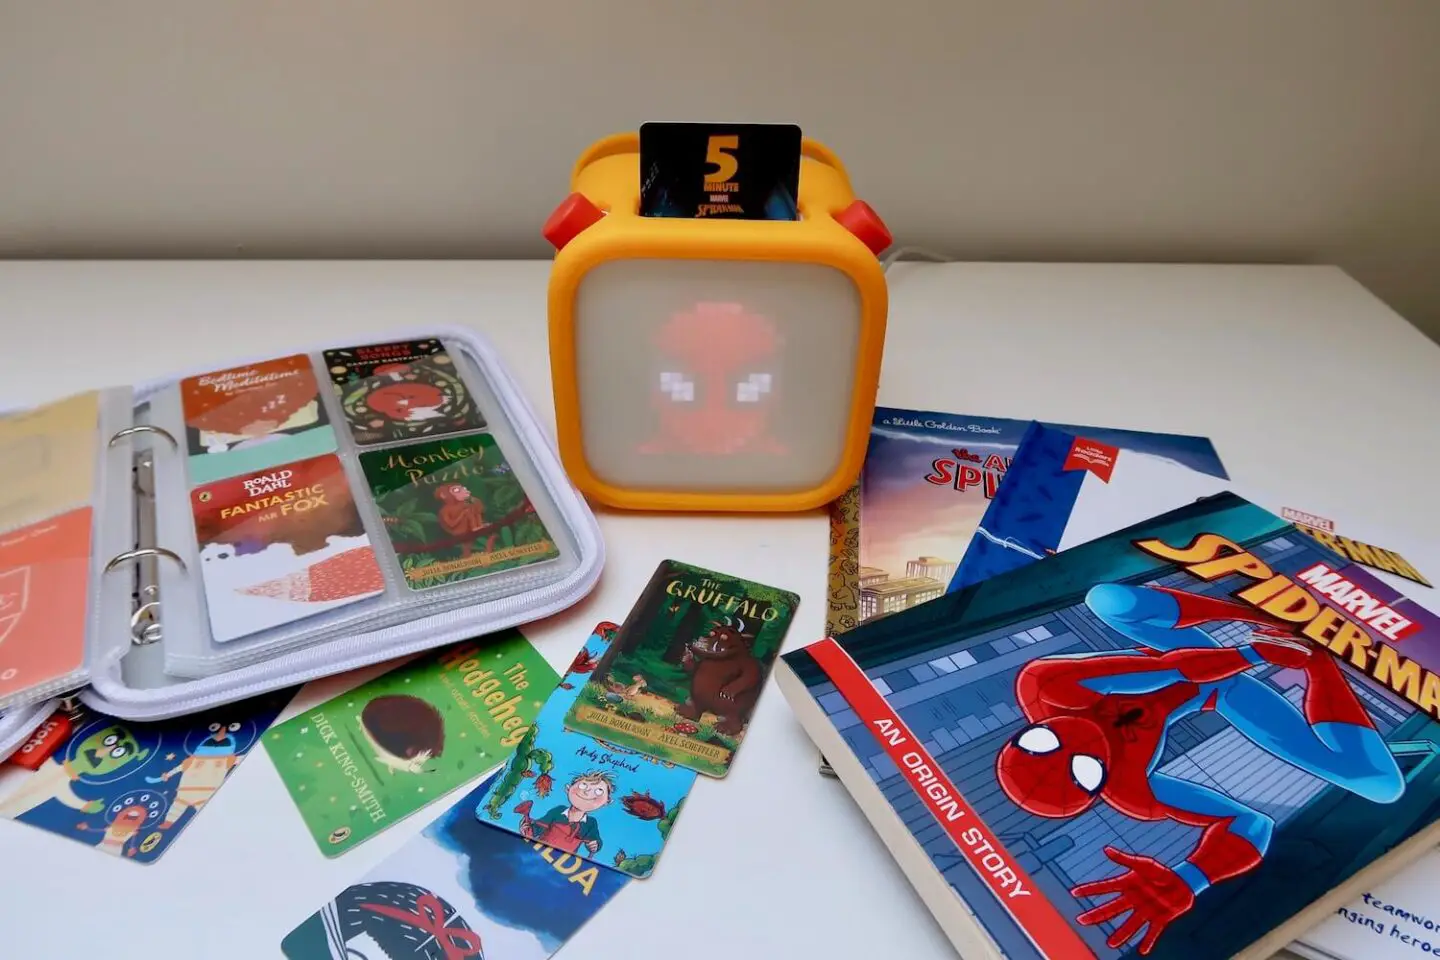 A Yoto player is in the centre of the picture with Spiderman's face is on the display. To the right of the player is a stack of 2 Spiderman books. To the left is a Yoto card holder filled with cards. More cards are scattered in the front.